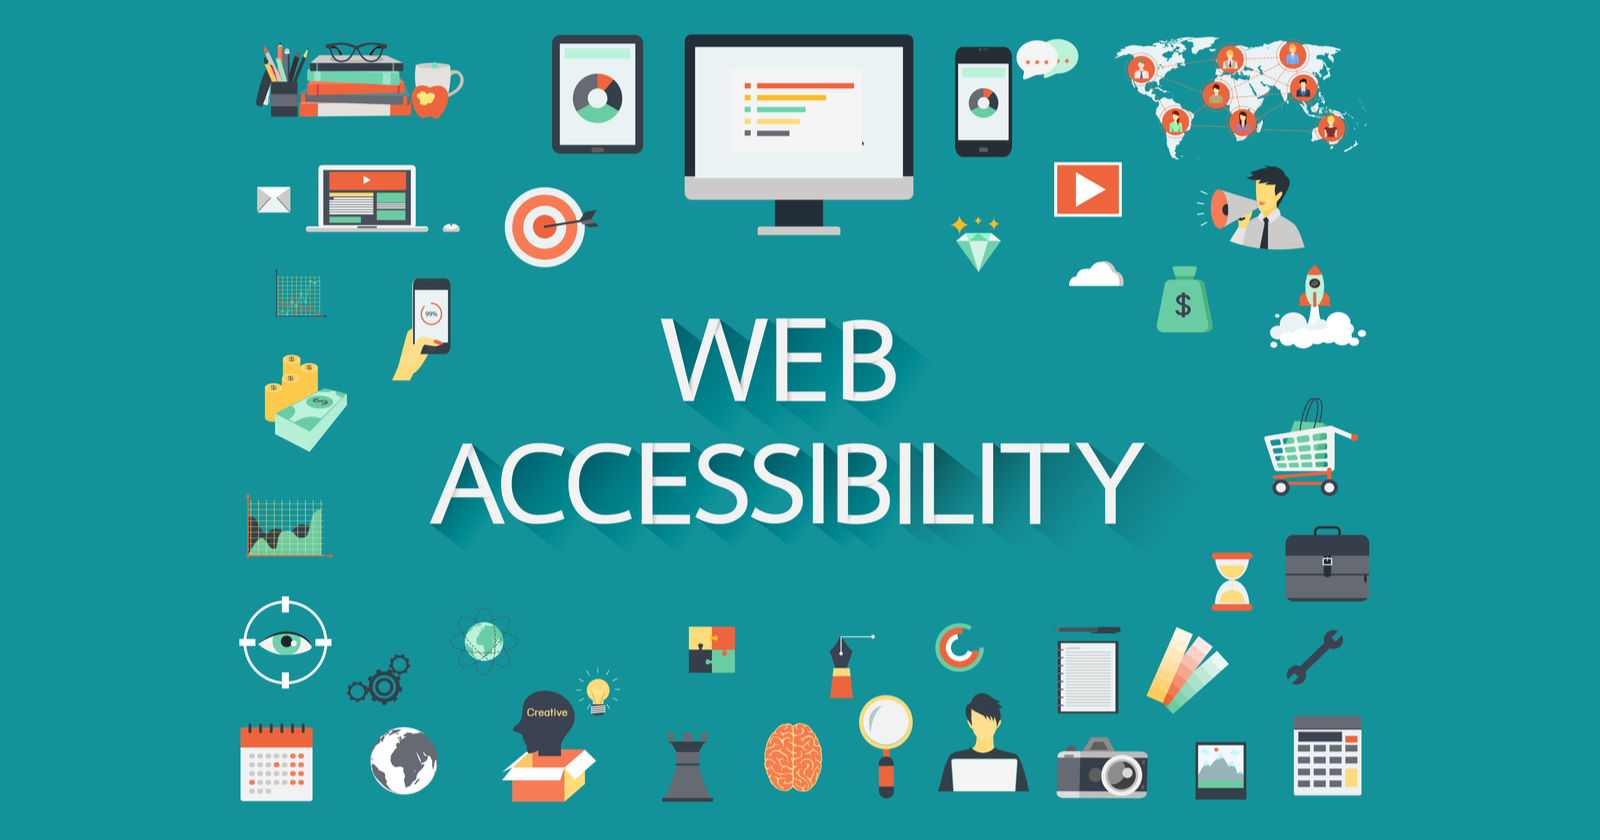 How to Make Websites Accessible for the Visually Impaired